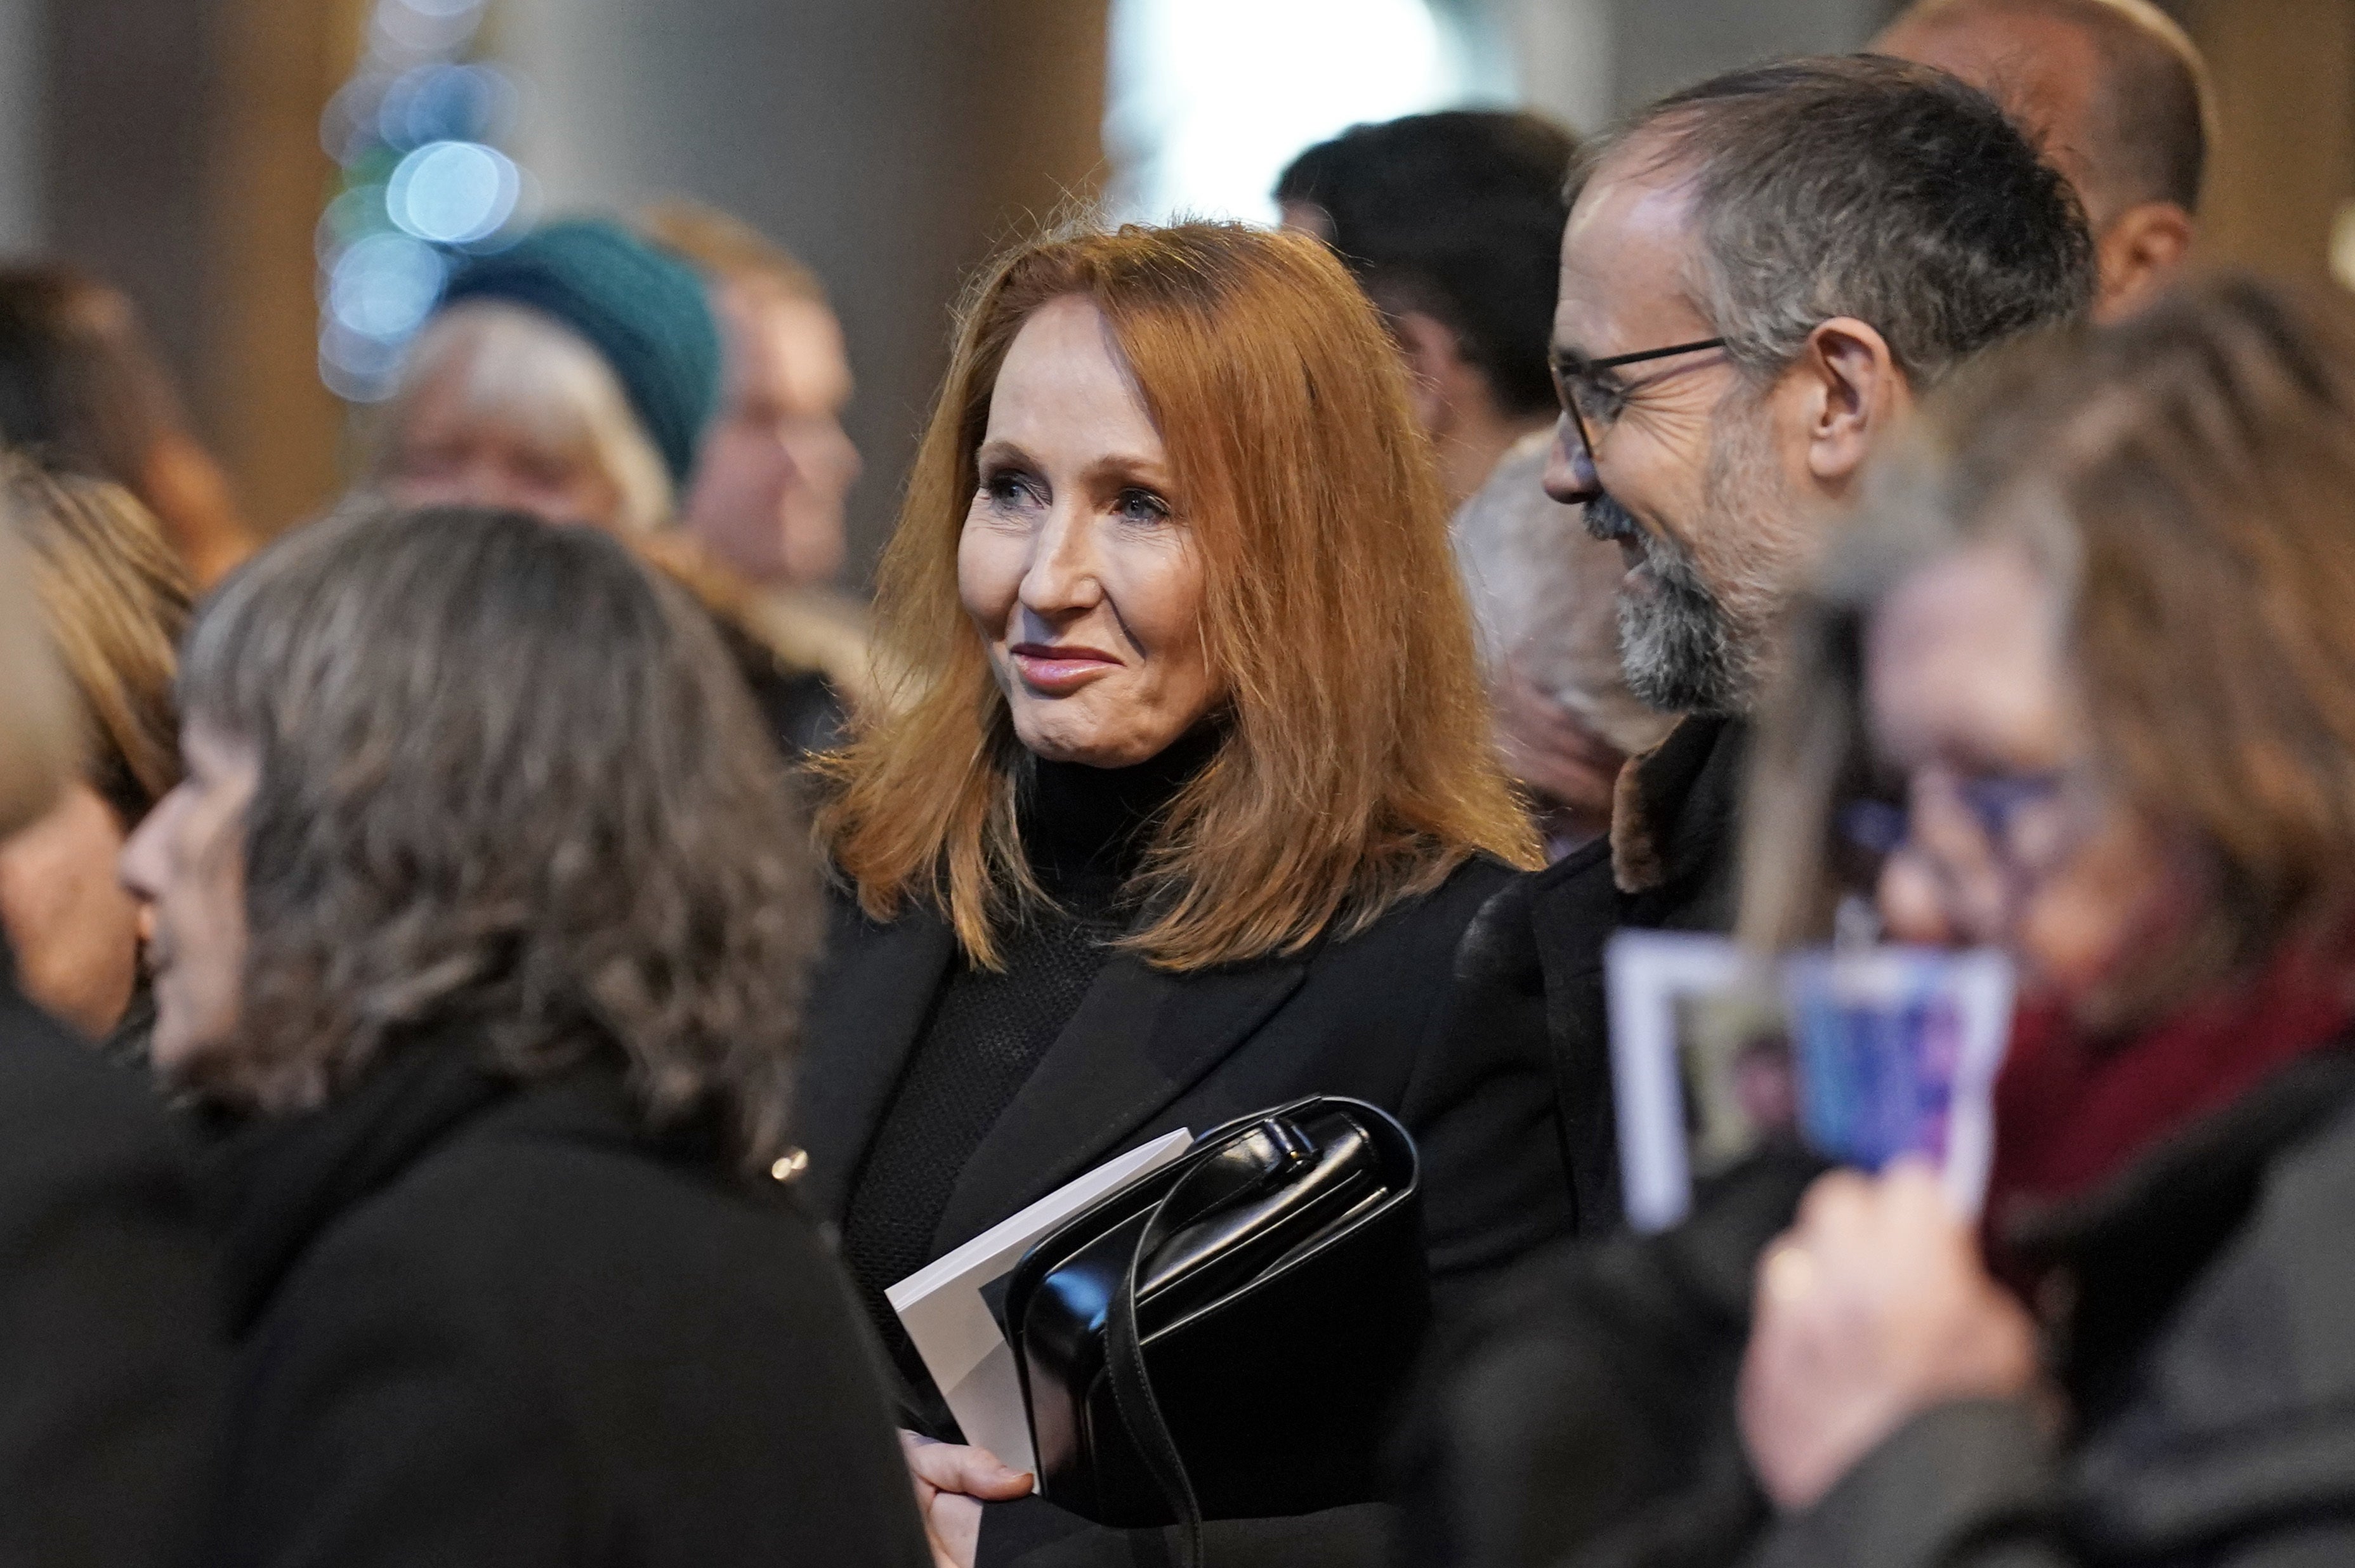 Rowling photographed in December at the memorial service of Alistair Darling